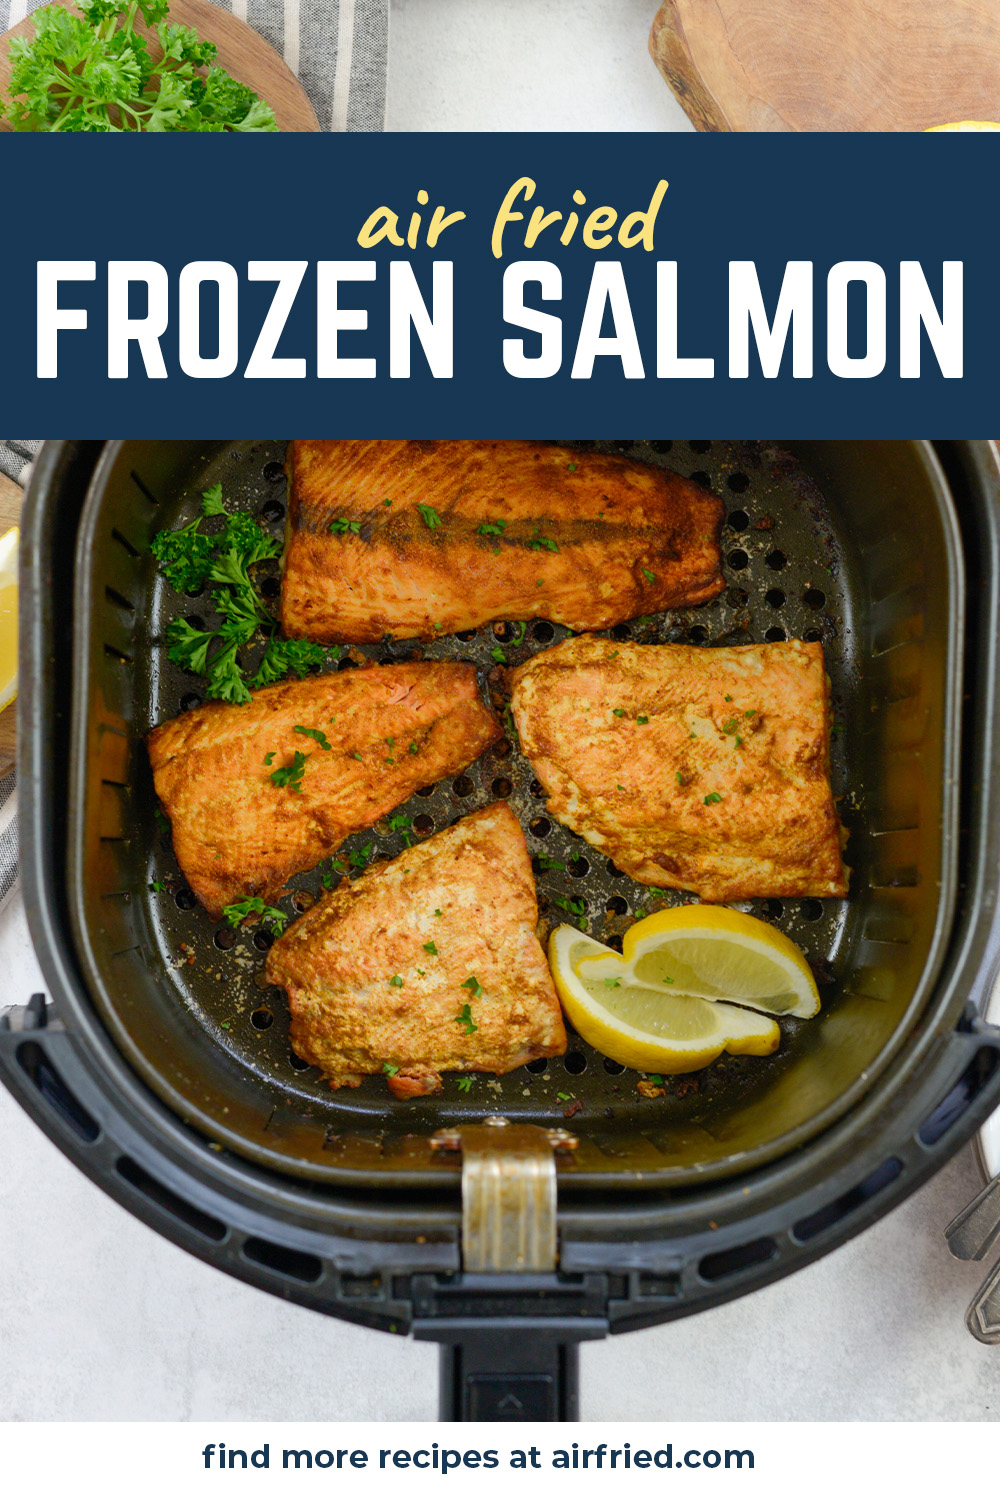 You can take frozen salmon fillets straight from the freezer into air fryer!  It doesn't get any easier than that!